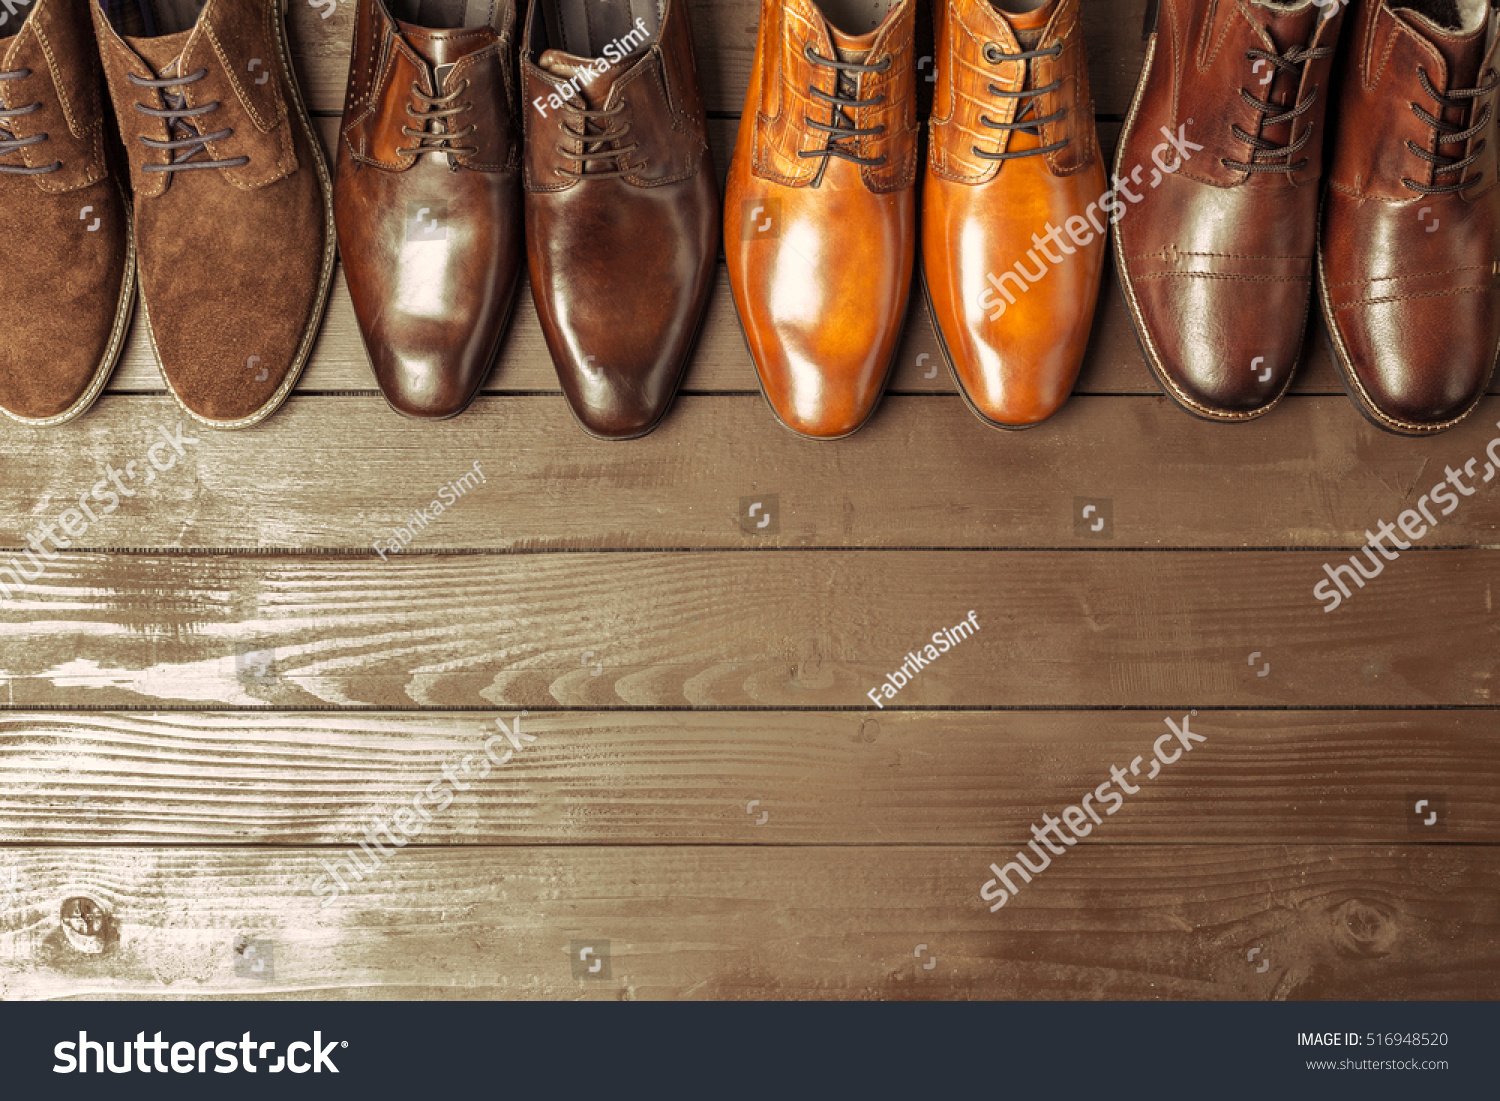 Fashion concept with male shoes on wooden background #516948520